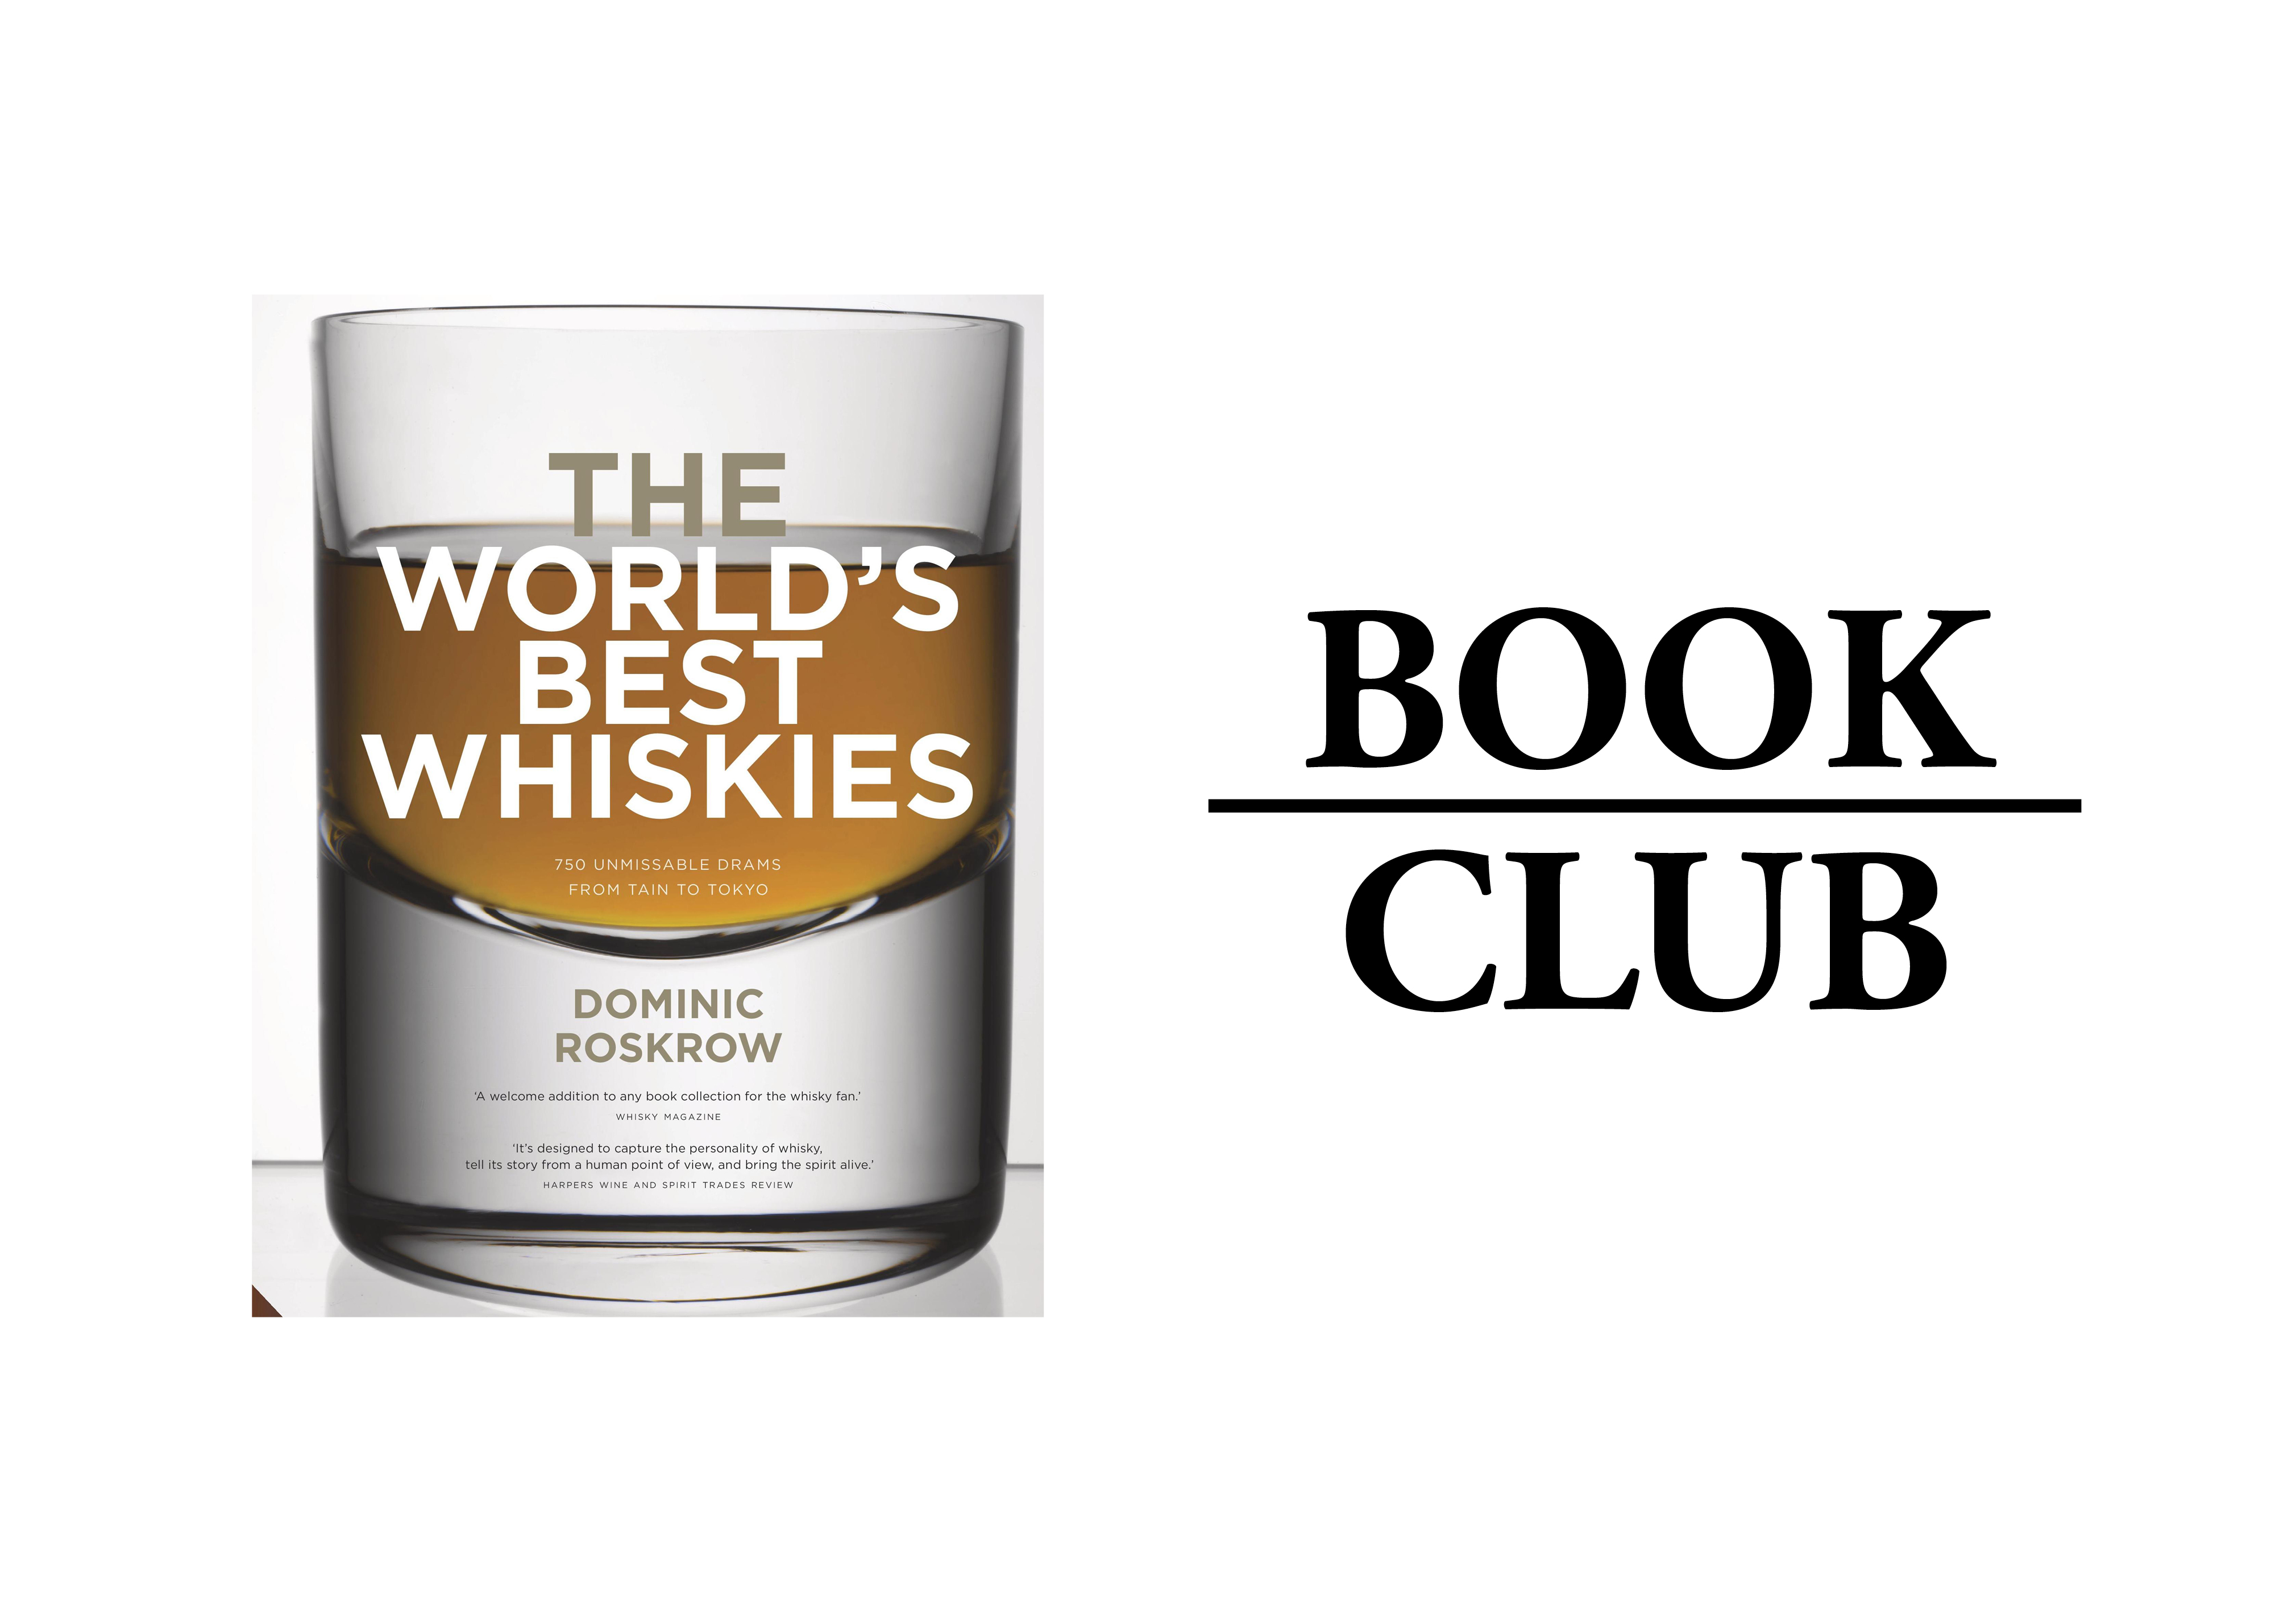 The World's Best Whiskies by Dominic Roskrow